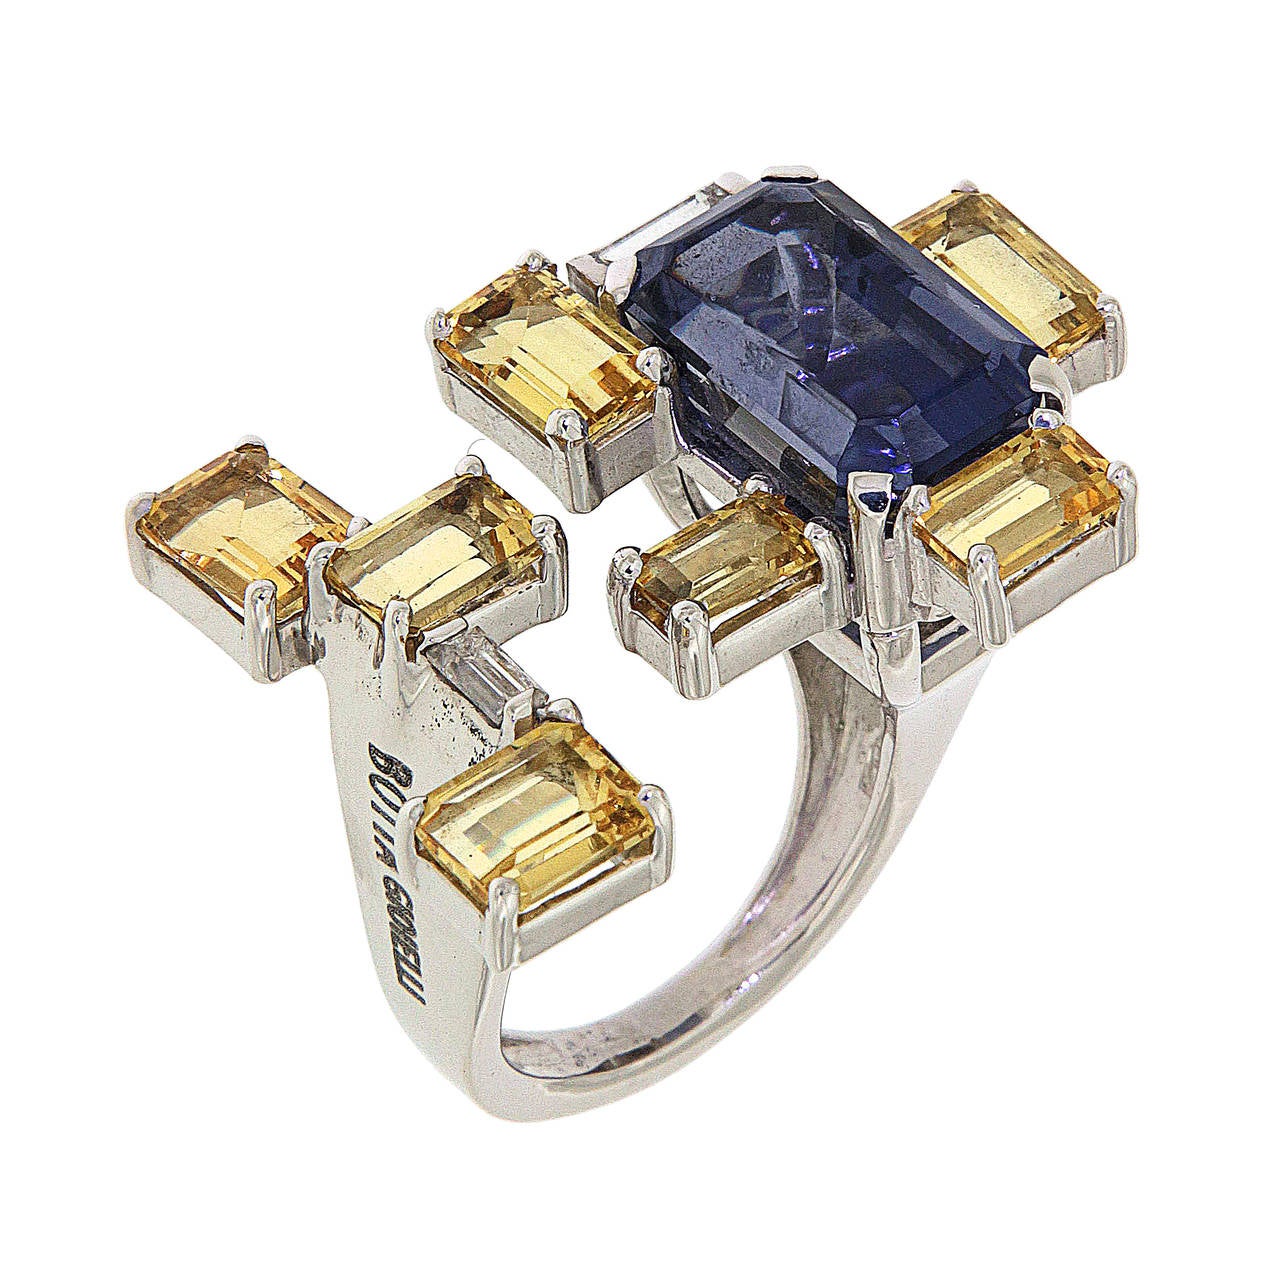 A geometric ring set in 18 carat White Gold with an intense 7.20 carat blue  Iolite, 5.30 carat Yellow Beryls and 0.40 carat Diamonds
The Finger Size is 7, can be resized.